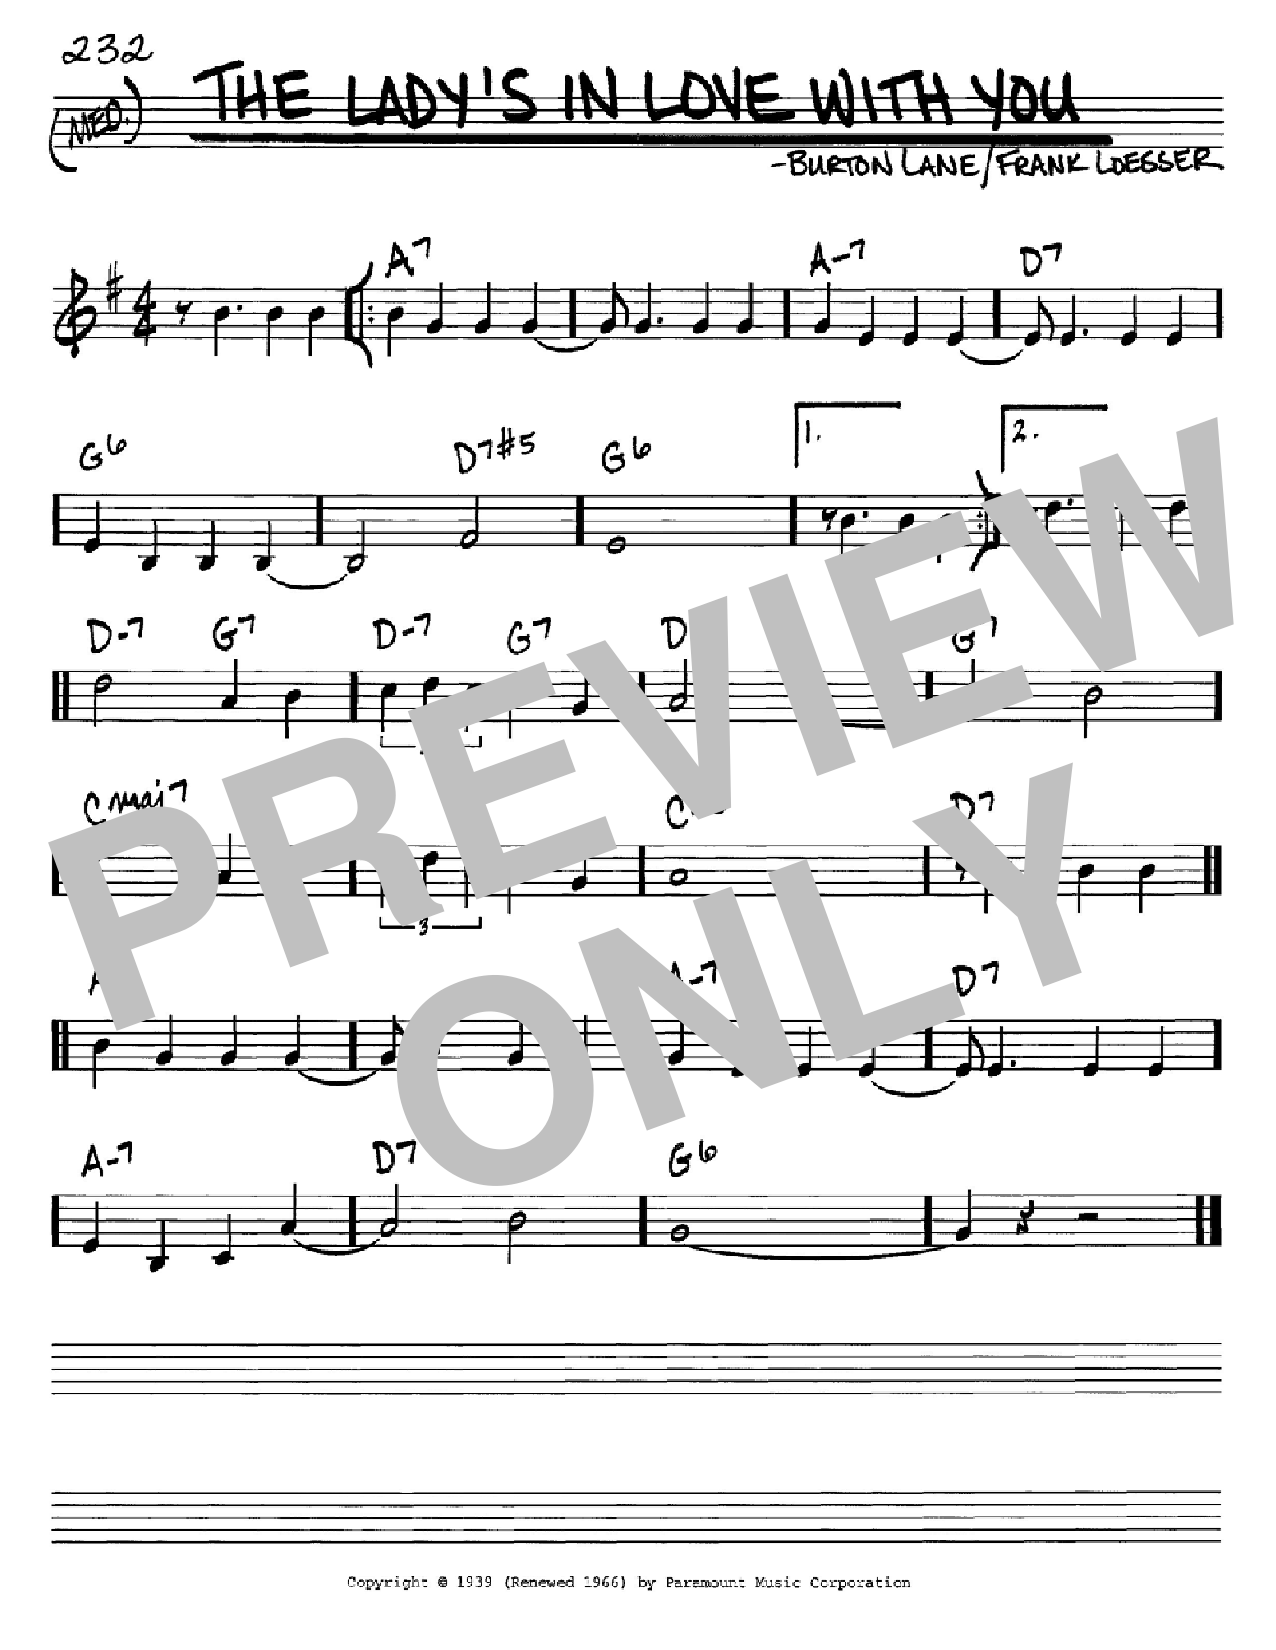 Download Benny Goodman The Lady's In Love With You Sheet Music